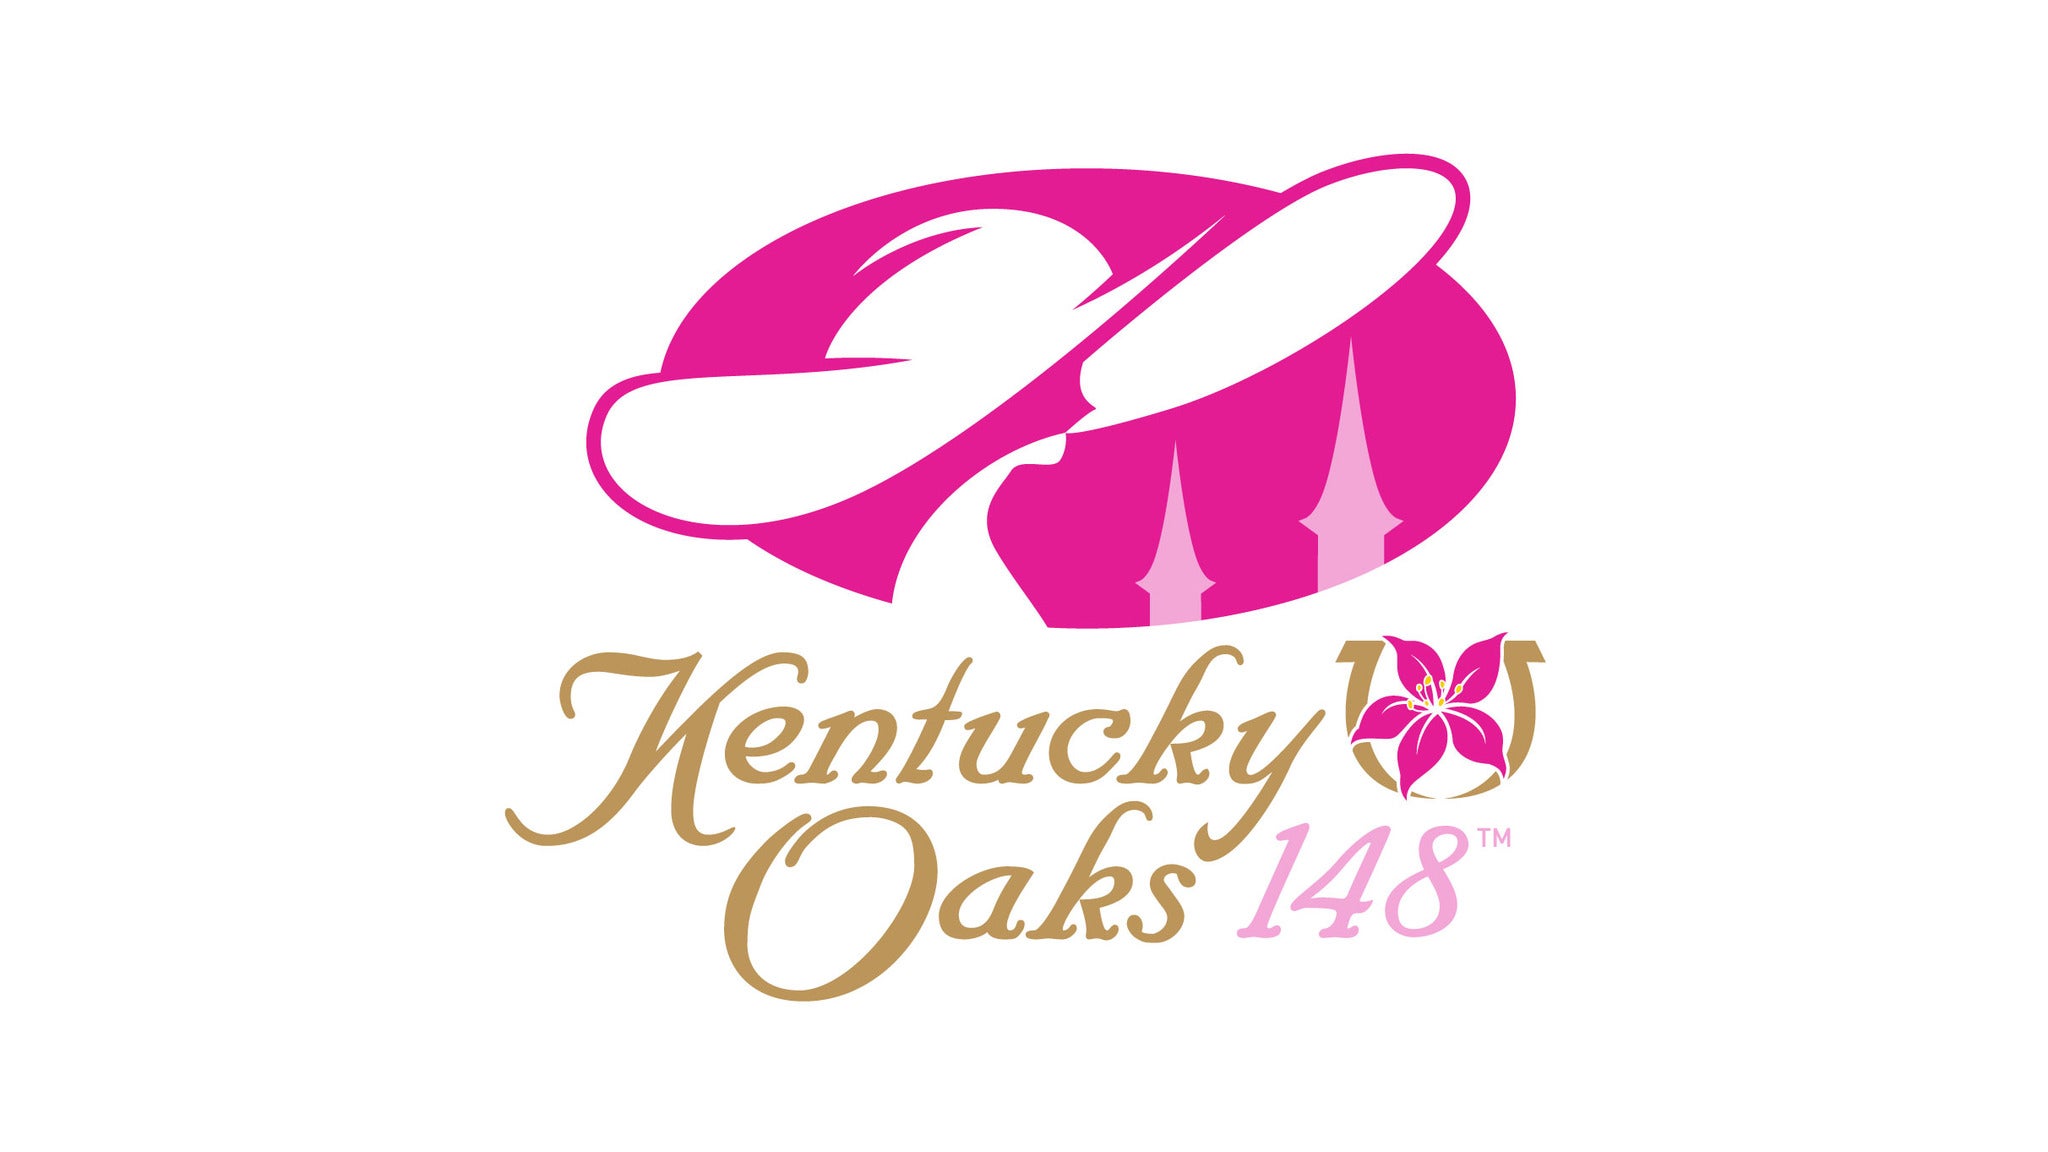 148th Kentucky Oaks - Infield General Admission *No Front Side Access in Louisville promo photo for Advance Purchase Pricing presale offer code